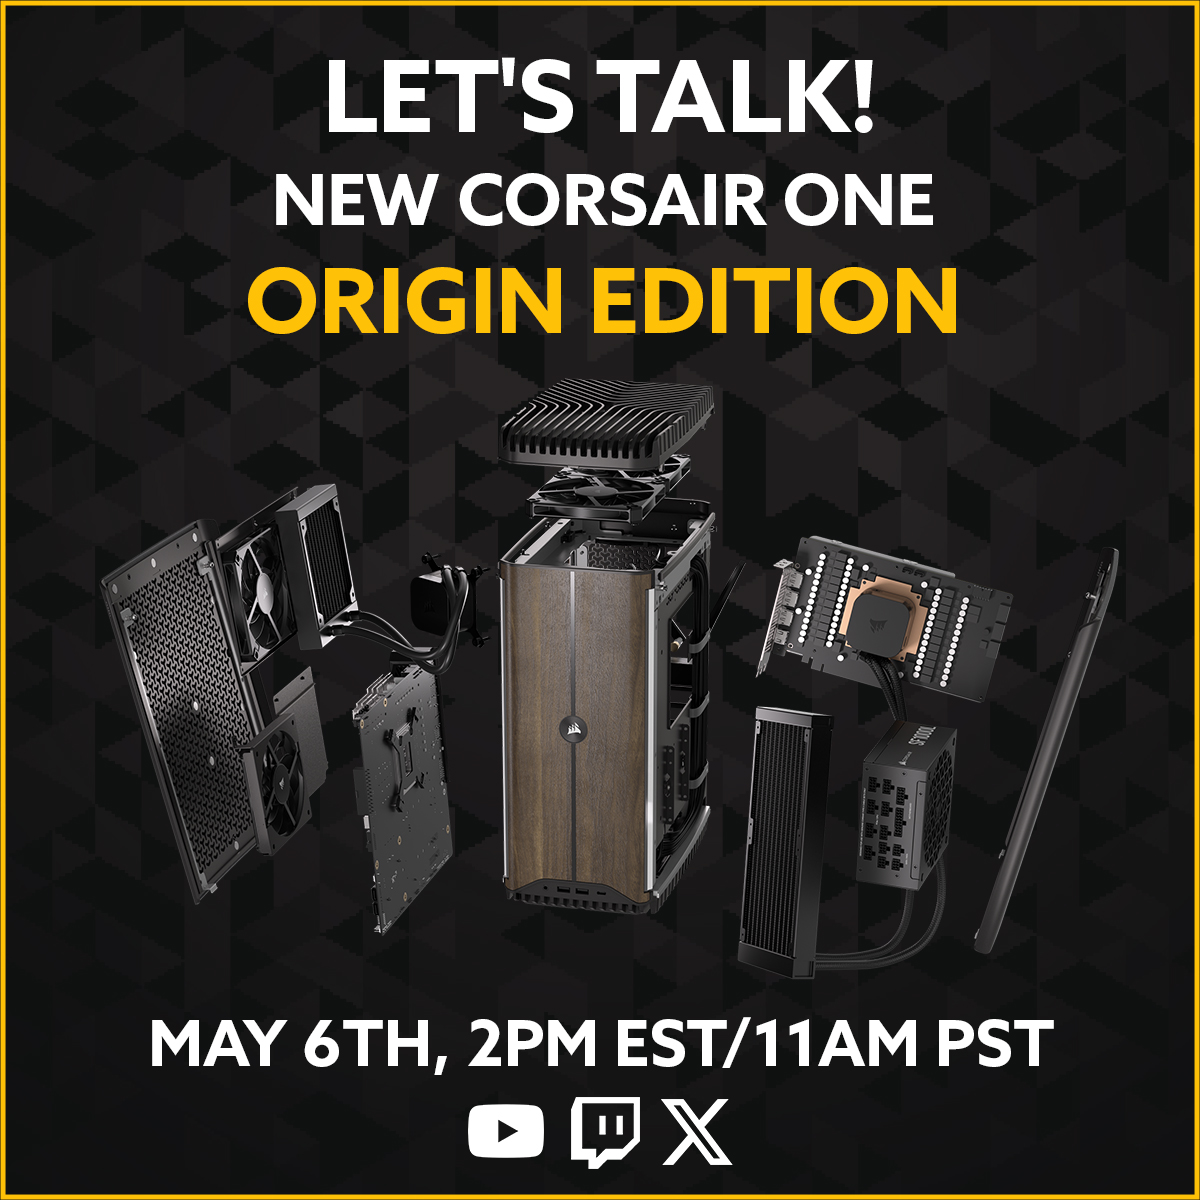 We are so excited for the release of the CORSAIR ONE ORIGIN EDITION so we are having a livestream today at 2PM EST/11AM PST to talk all about it. Join us at twitch.tv/originpc